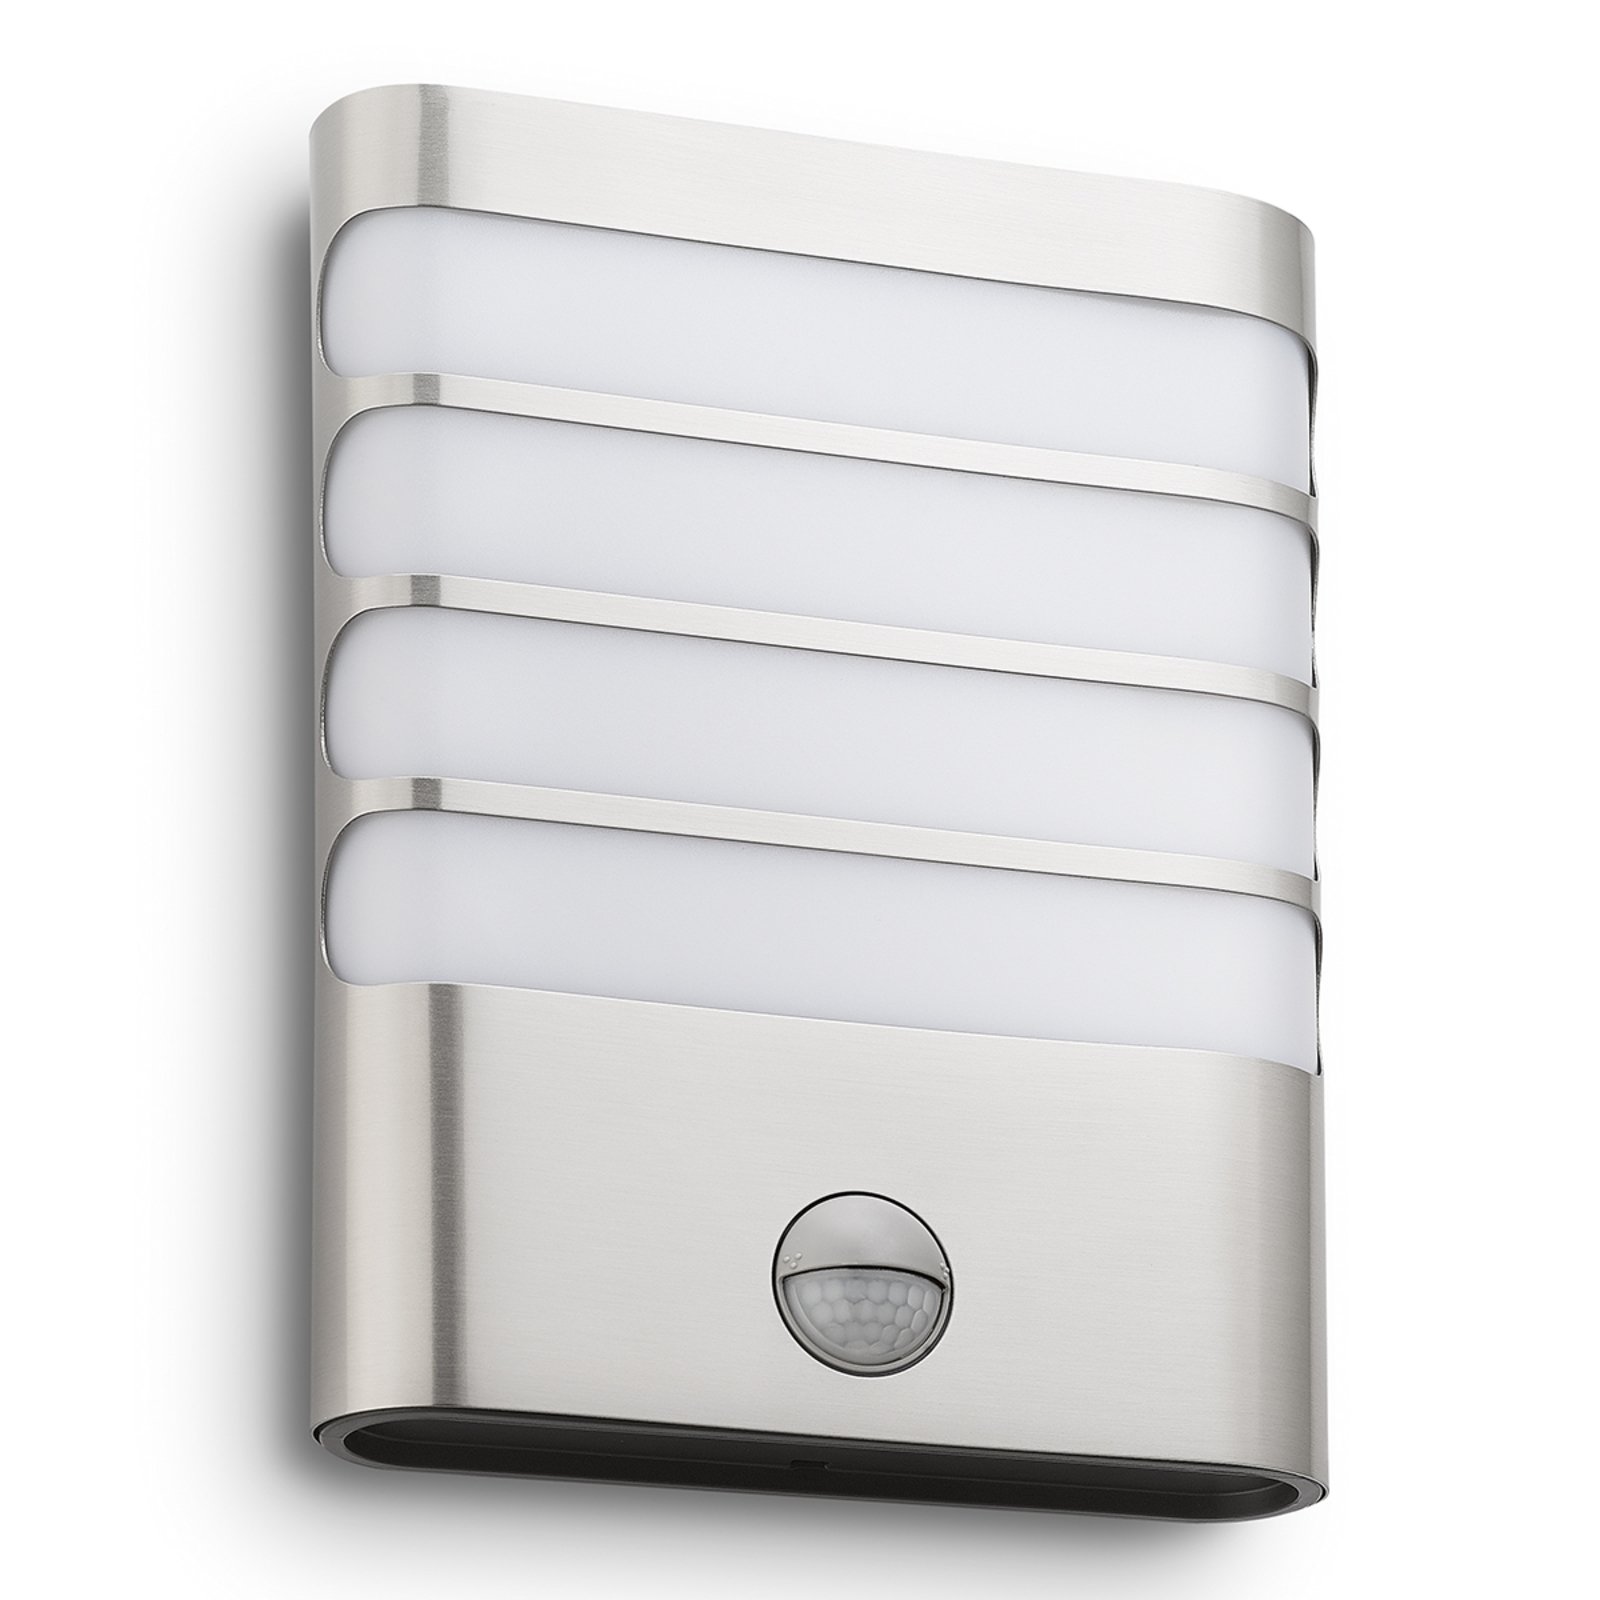 Philips Raccoon LED wall light, stainless steel